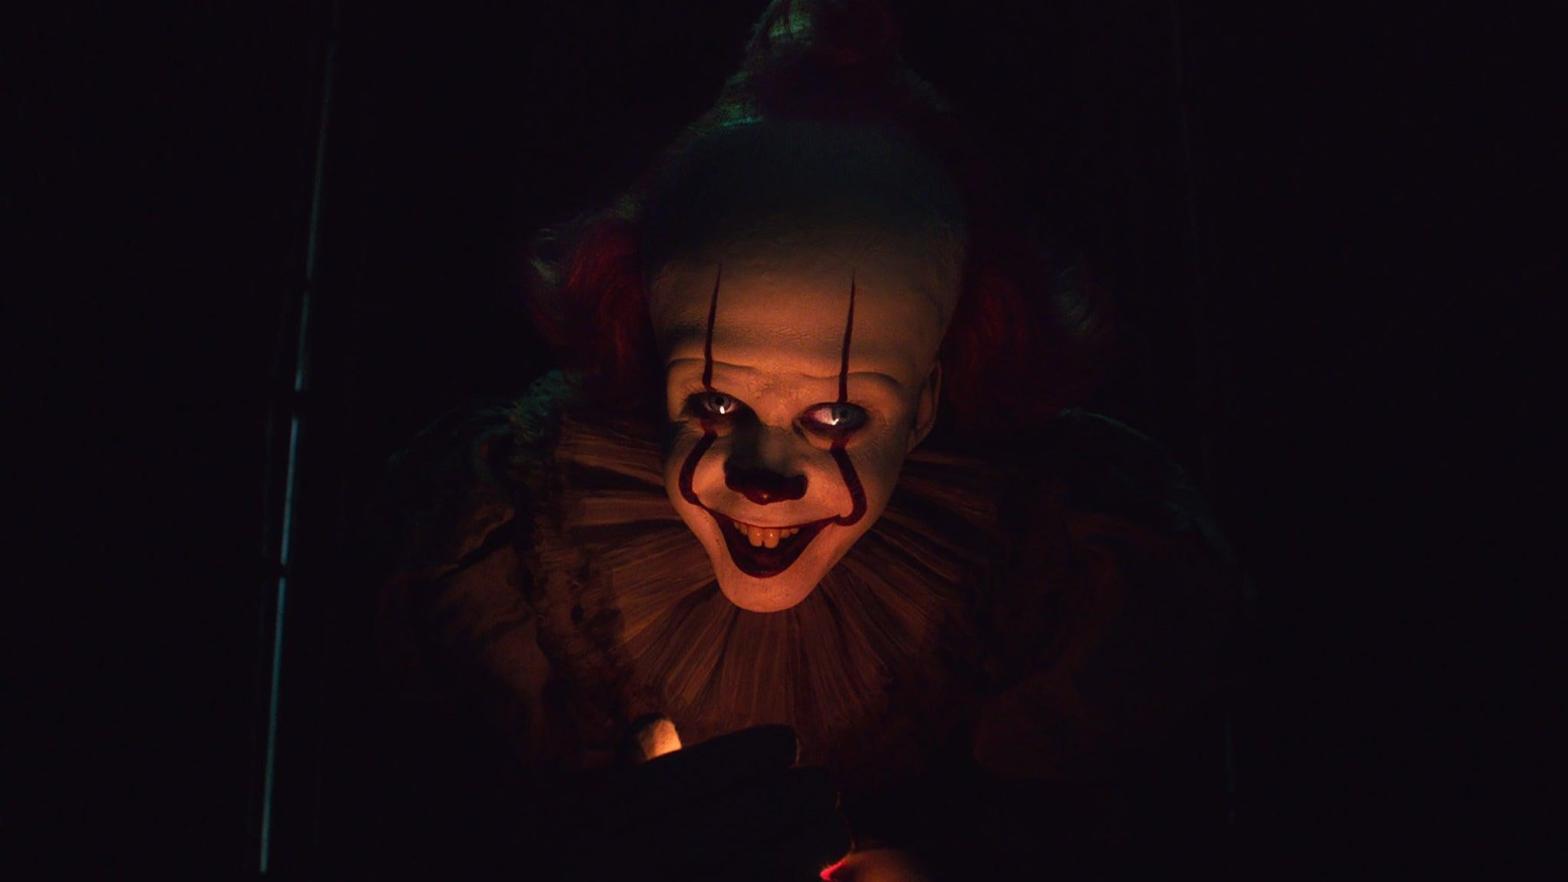 More Pennywise might be coming to HBO Max. (Image: Warner Bros.)